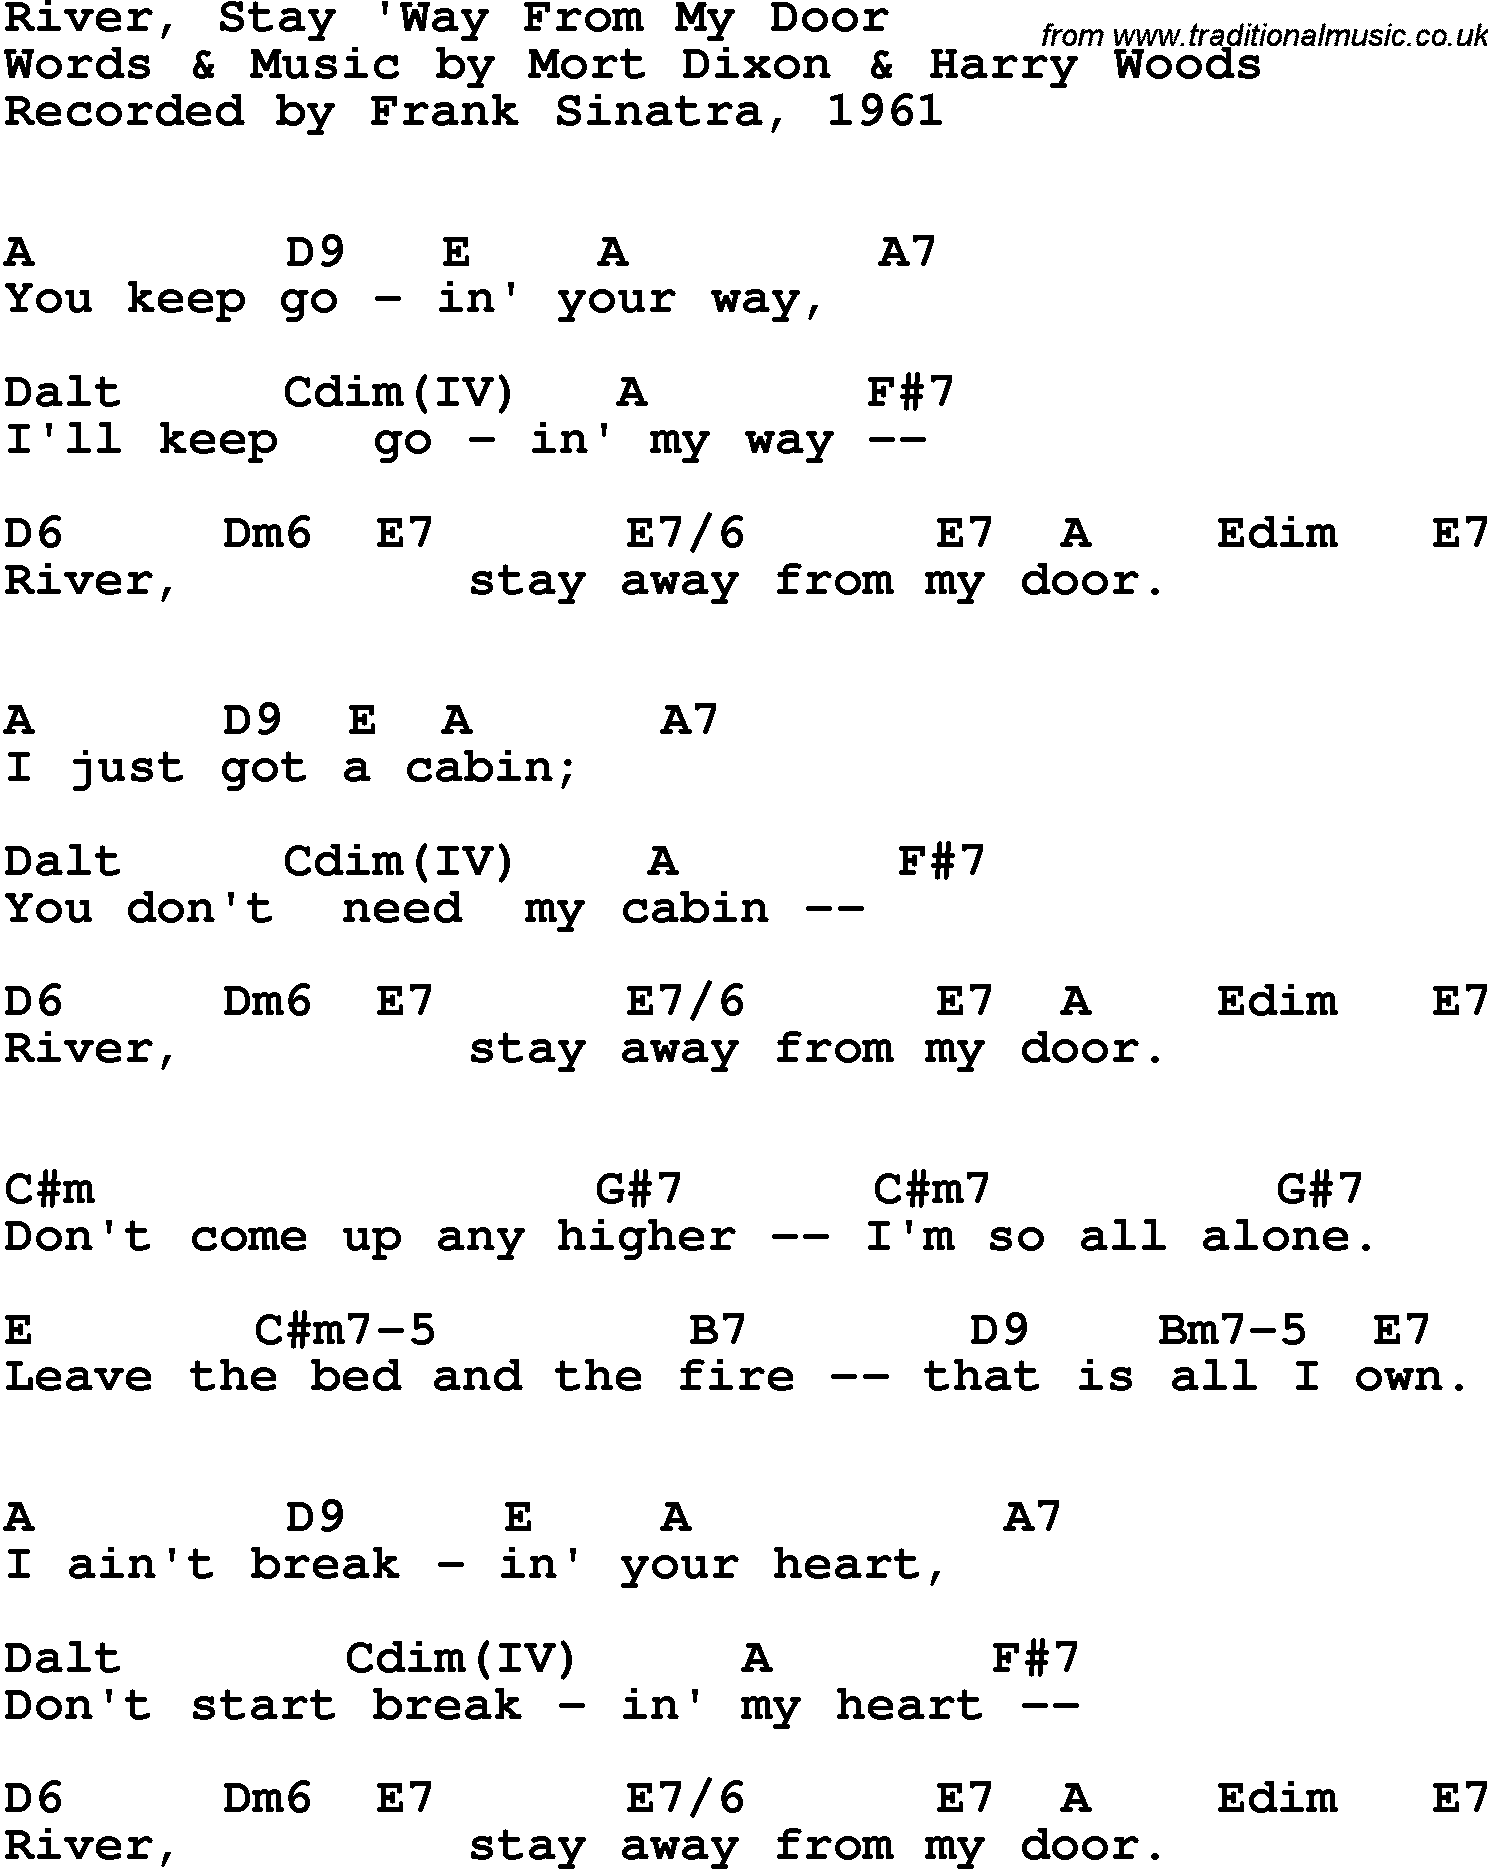 Song Lyrics with guitar chords for River Stay 'way From My Door - Frank Sinatra, 1961